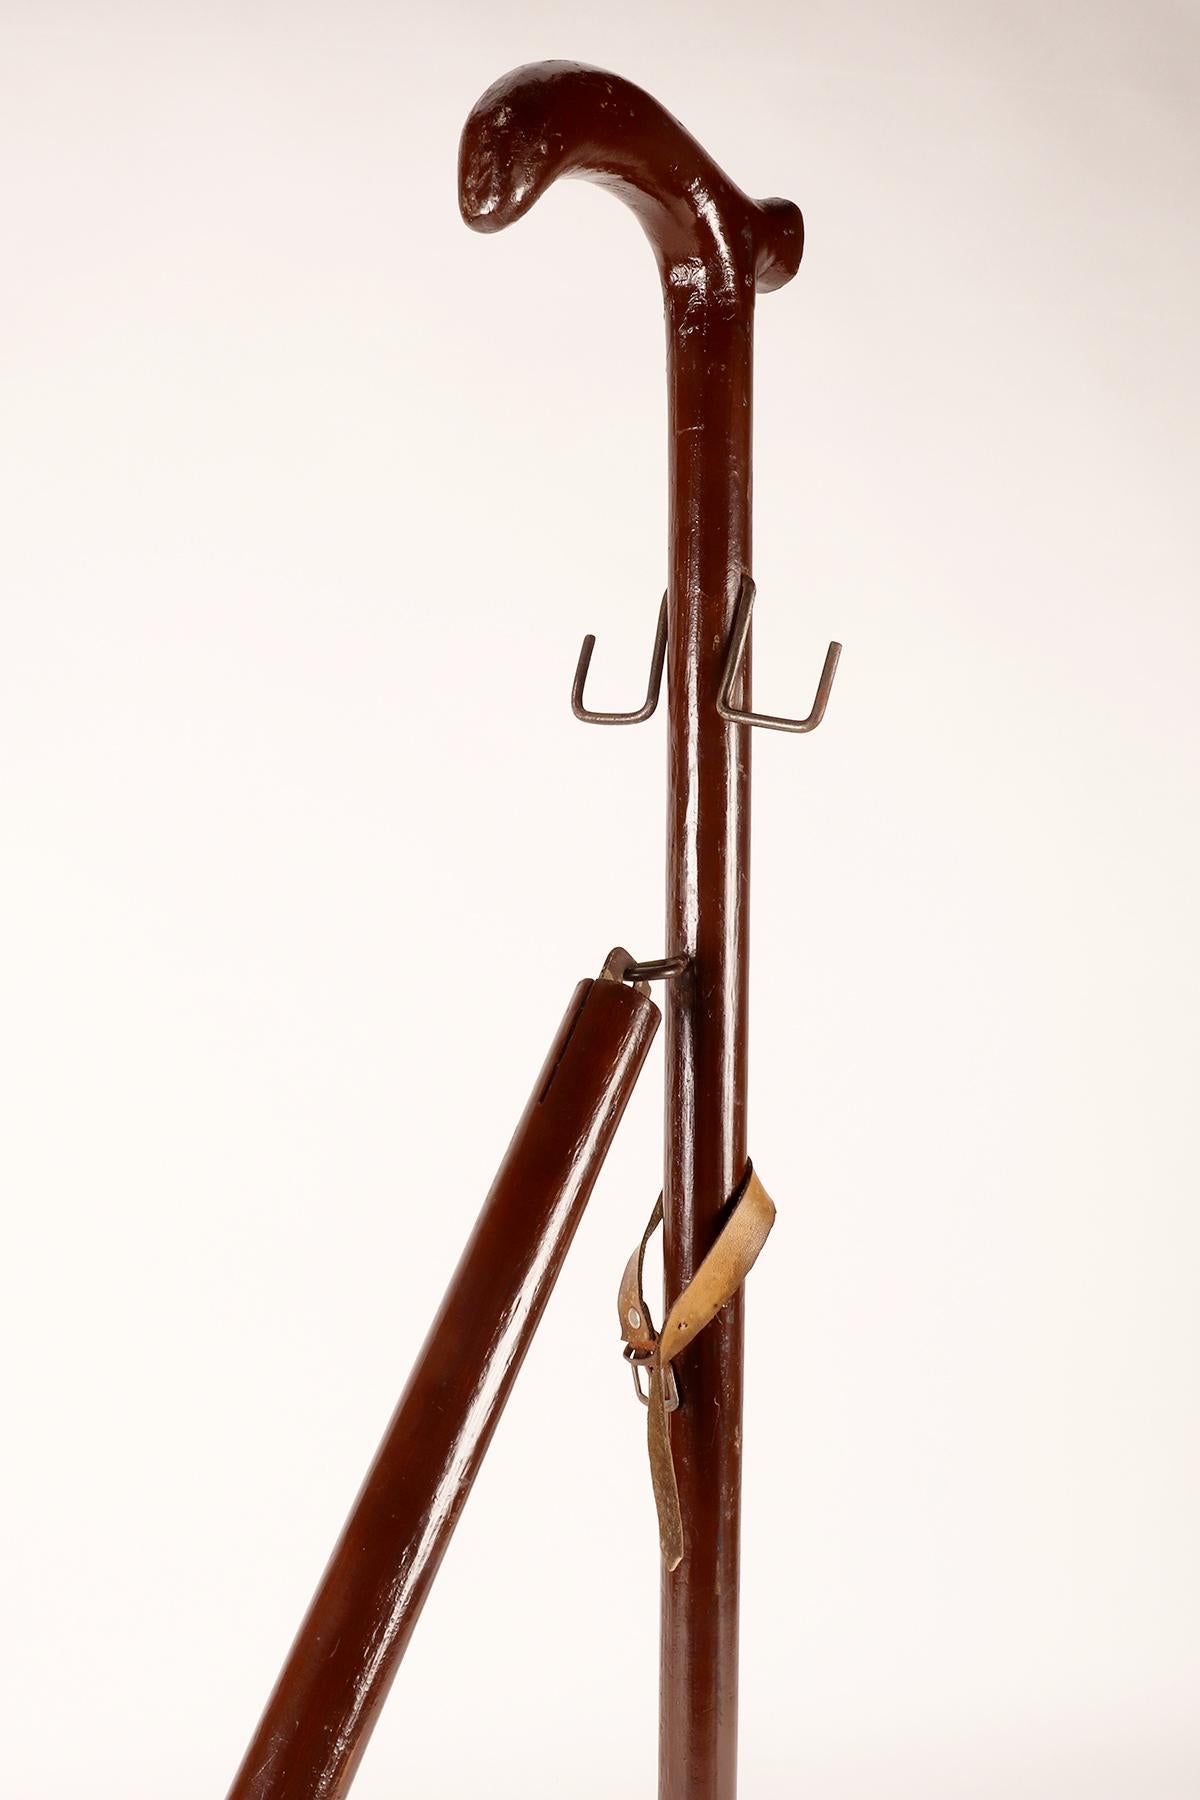 Iron Gadget-system walking stick with bag holder function, Germany, 1920s.